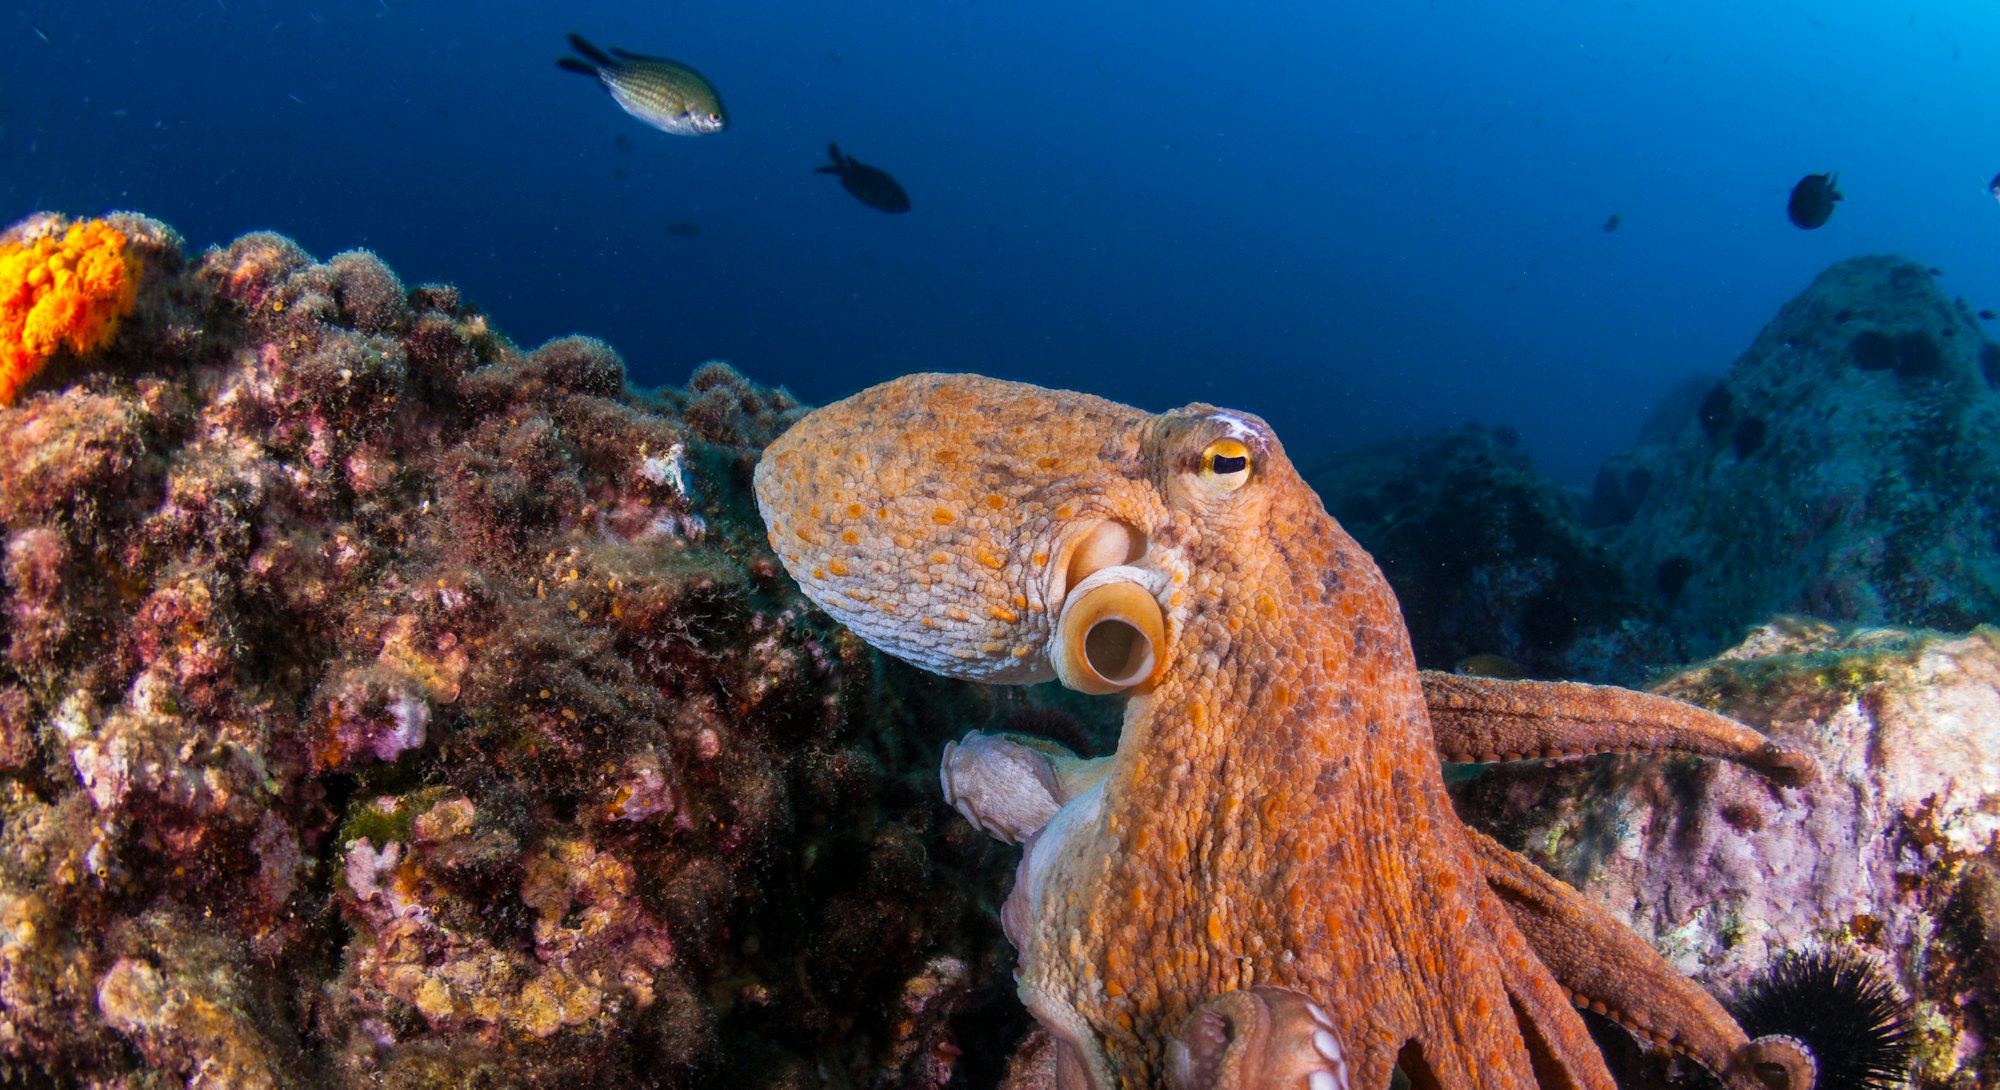 Close-up of a common octopus (Octopus vulgaris)